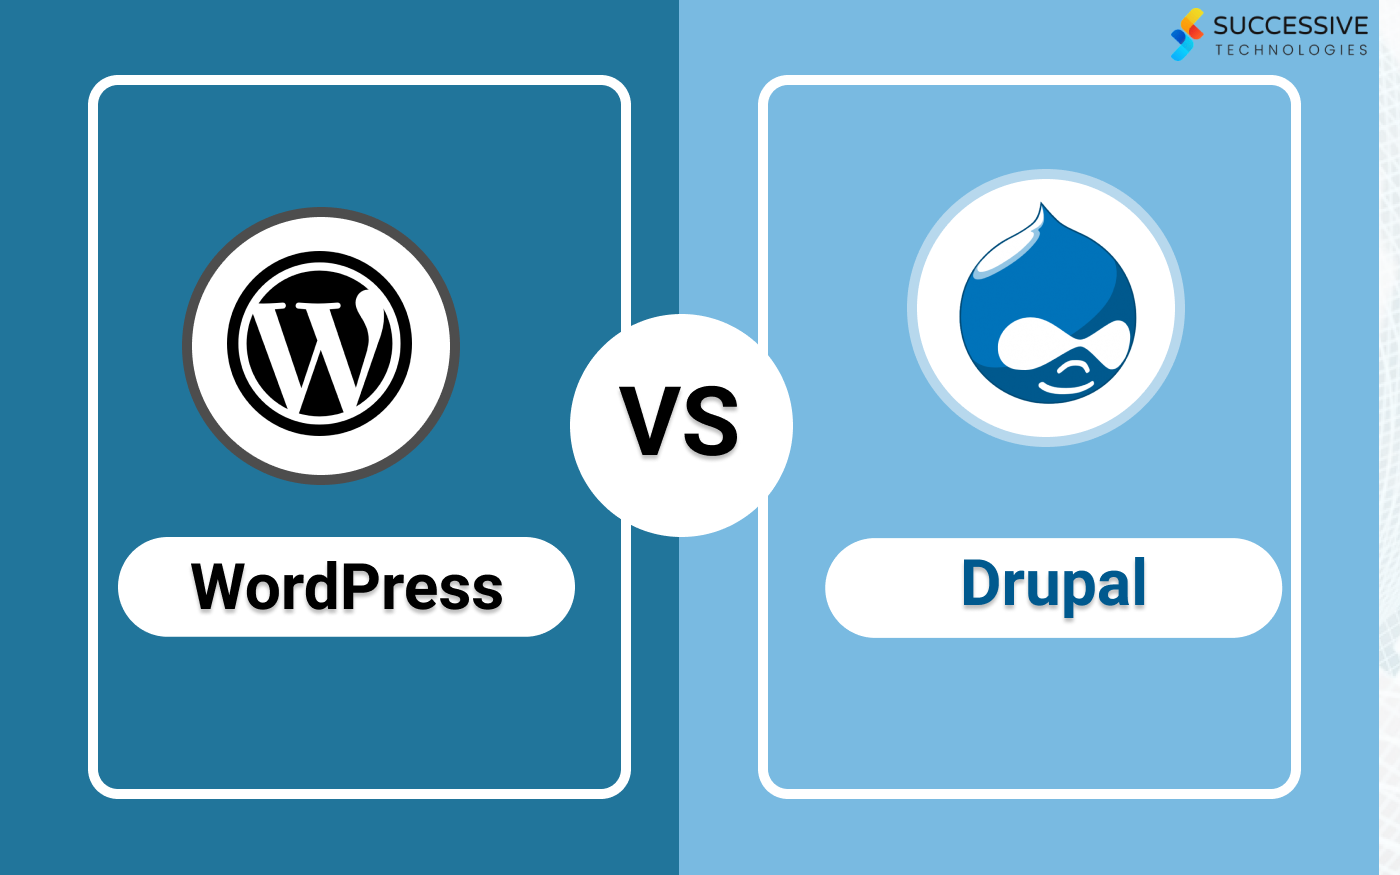 Drupal vs WordPress: Which One to Choose